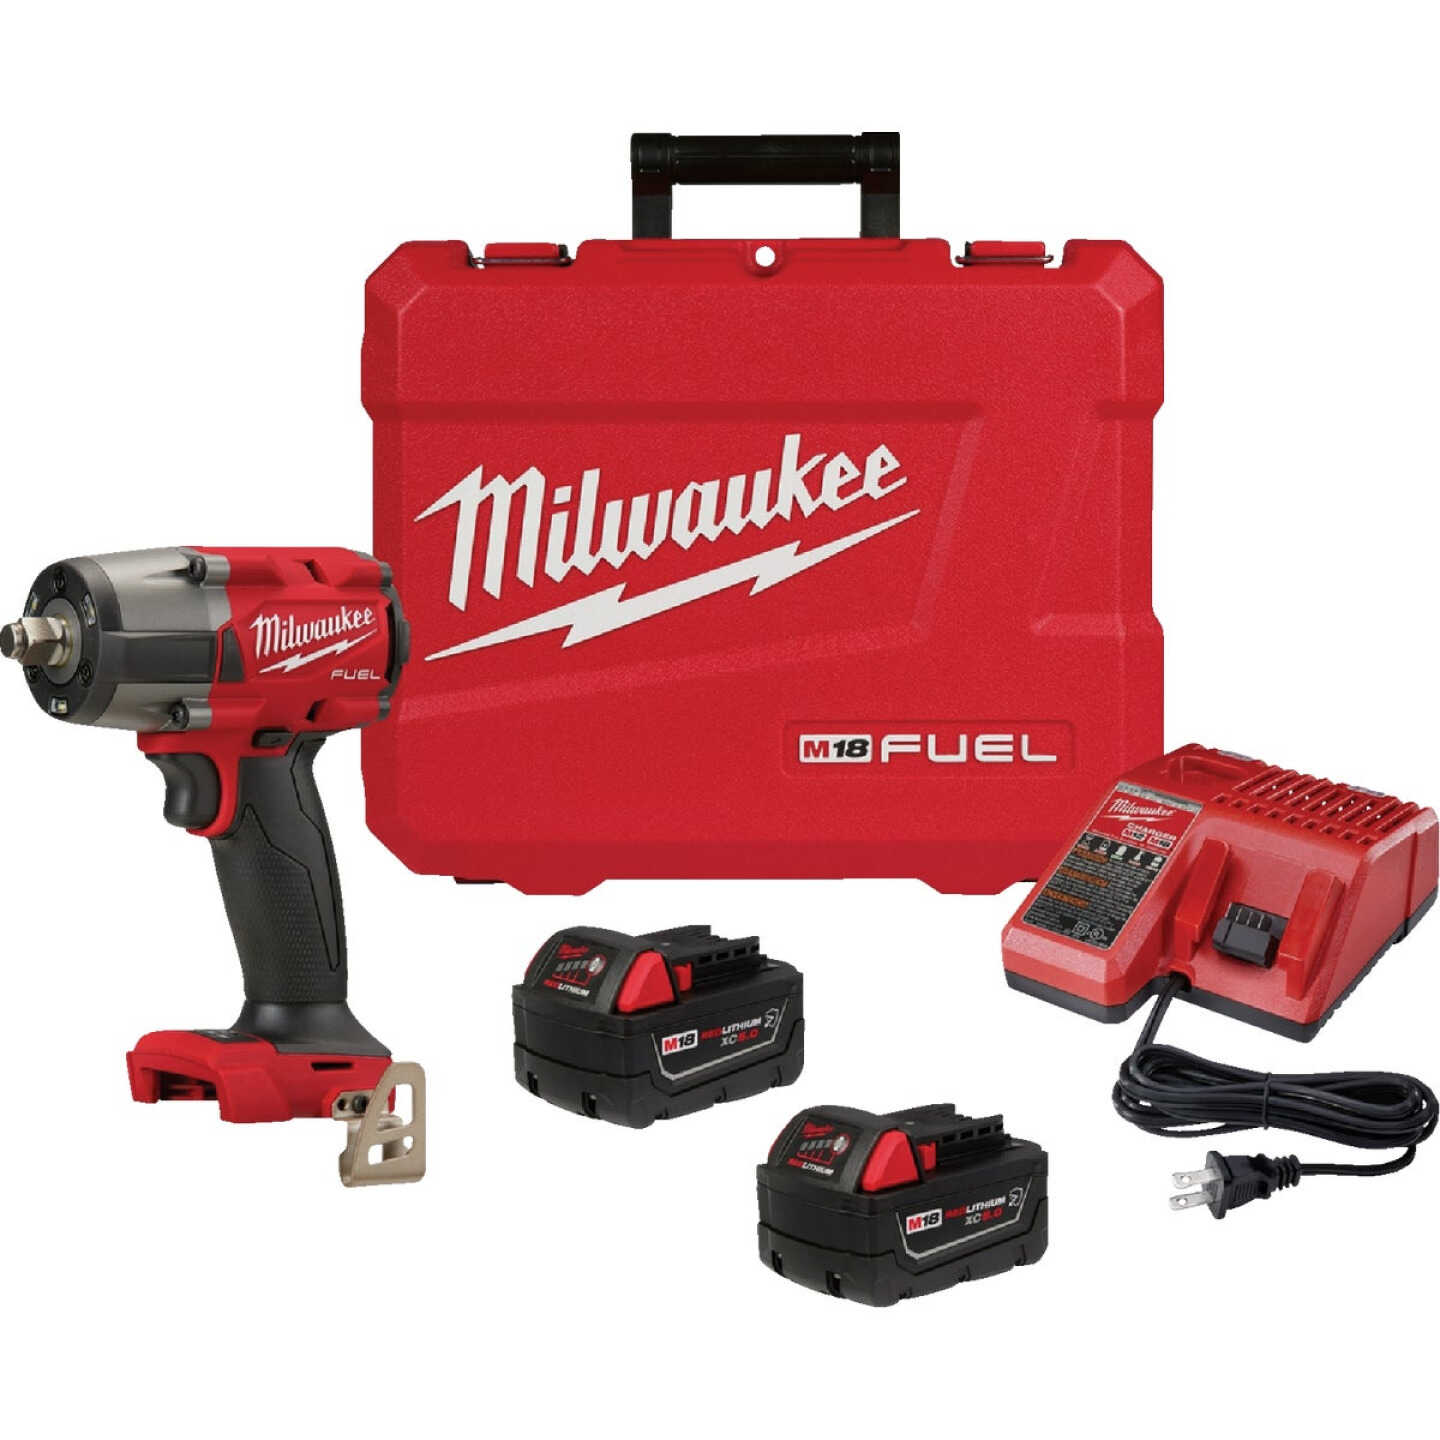 Cordless Drills and Accessories